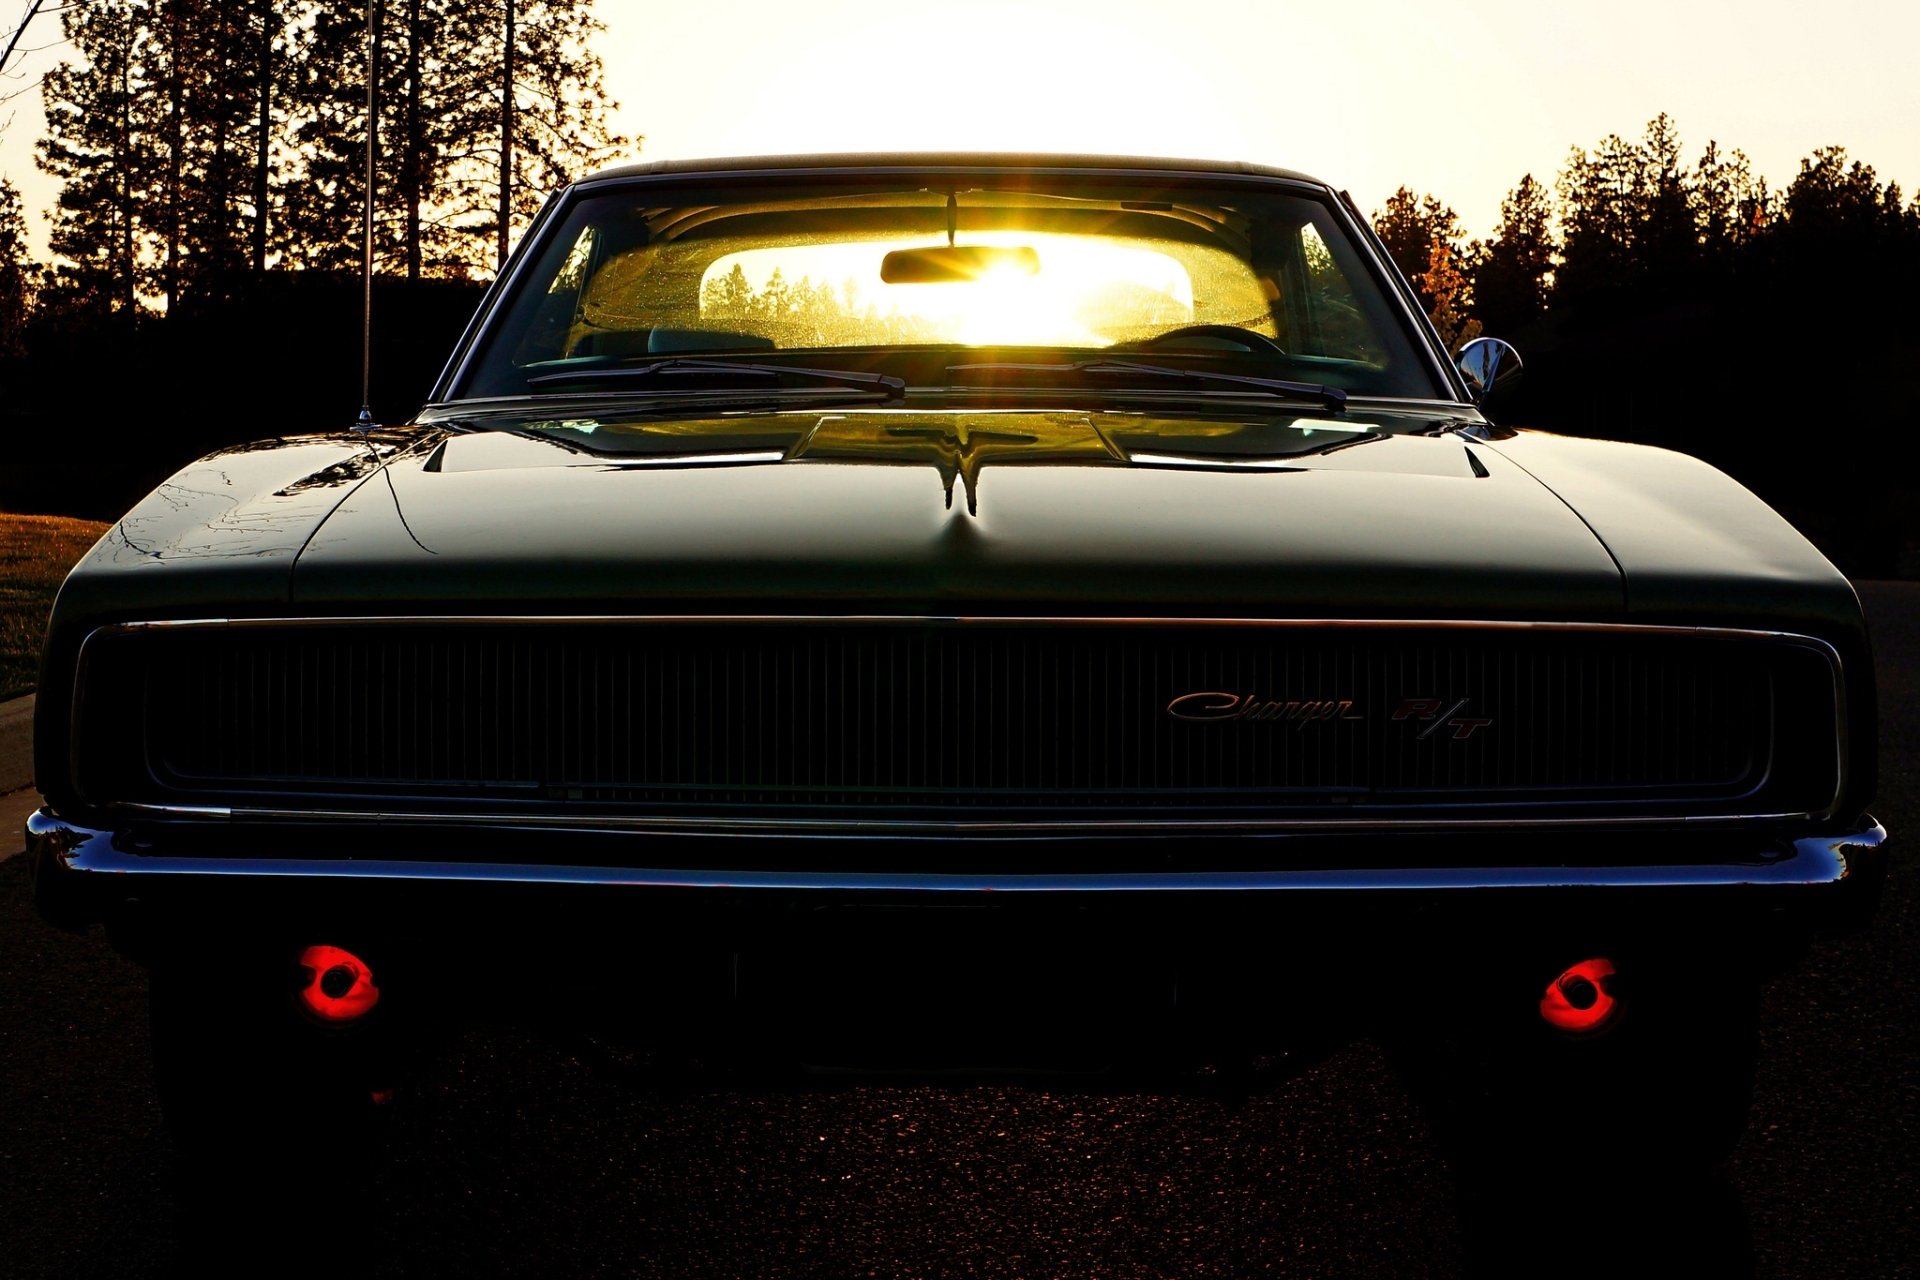 1968 Dodge Charger Full Hd Wallpaper And Background Image 1920x1280